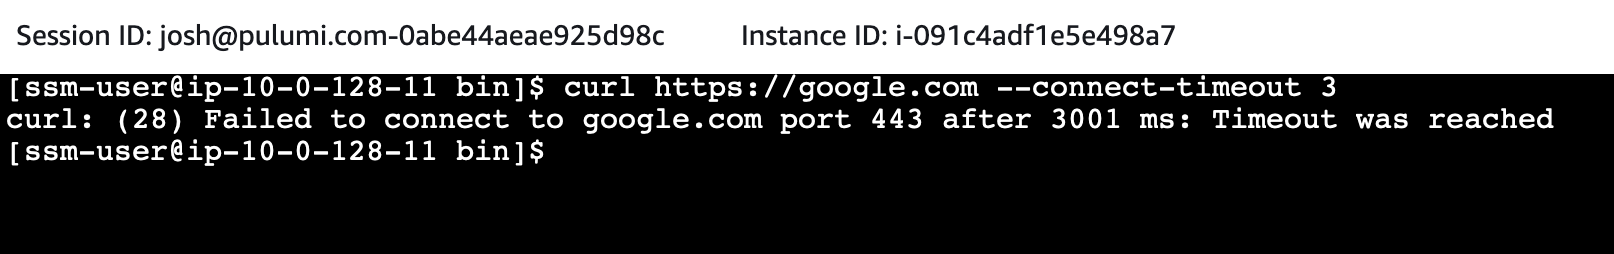 Screenshot of a cURL command to google.com being blocked by AWS Network Firewall